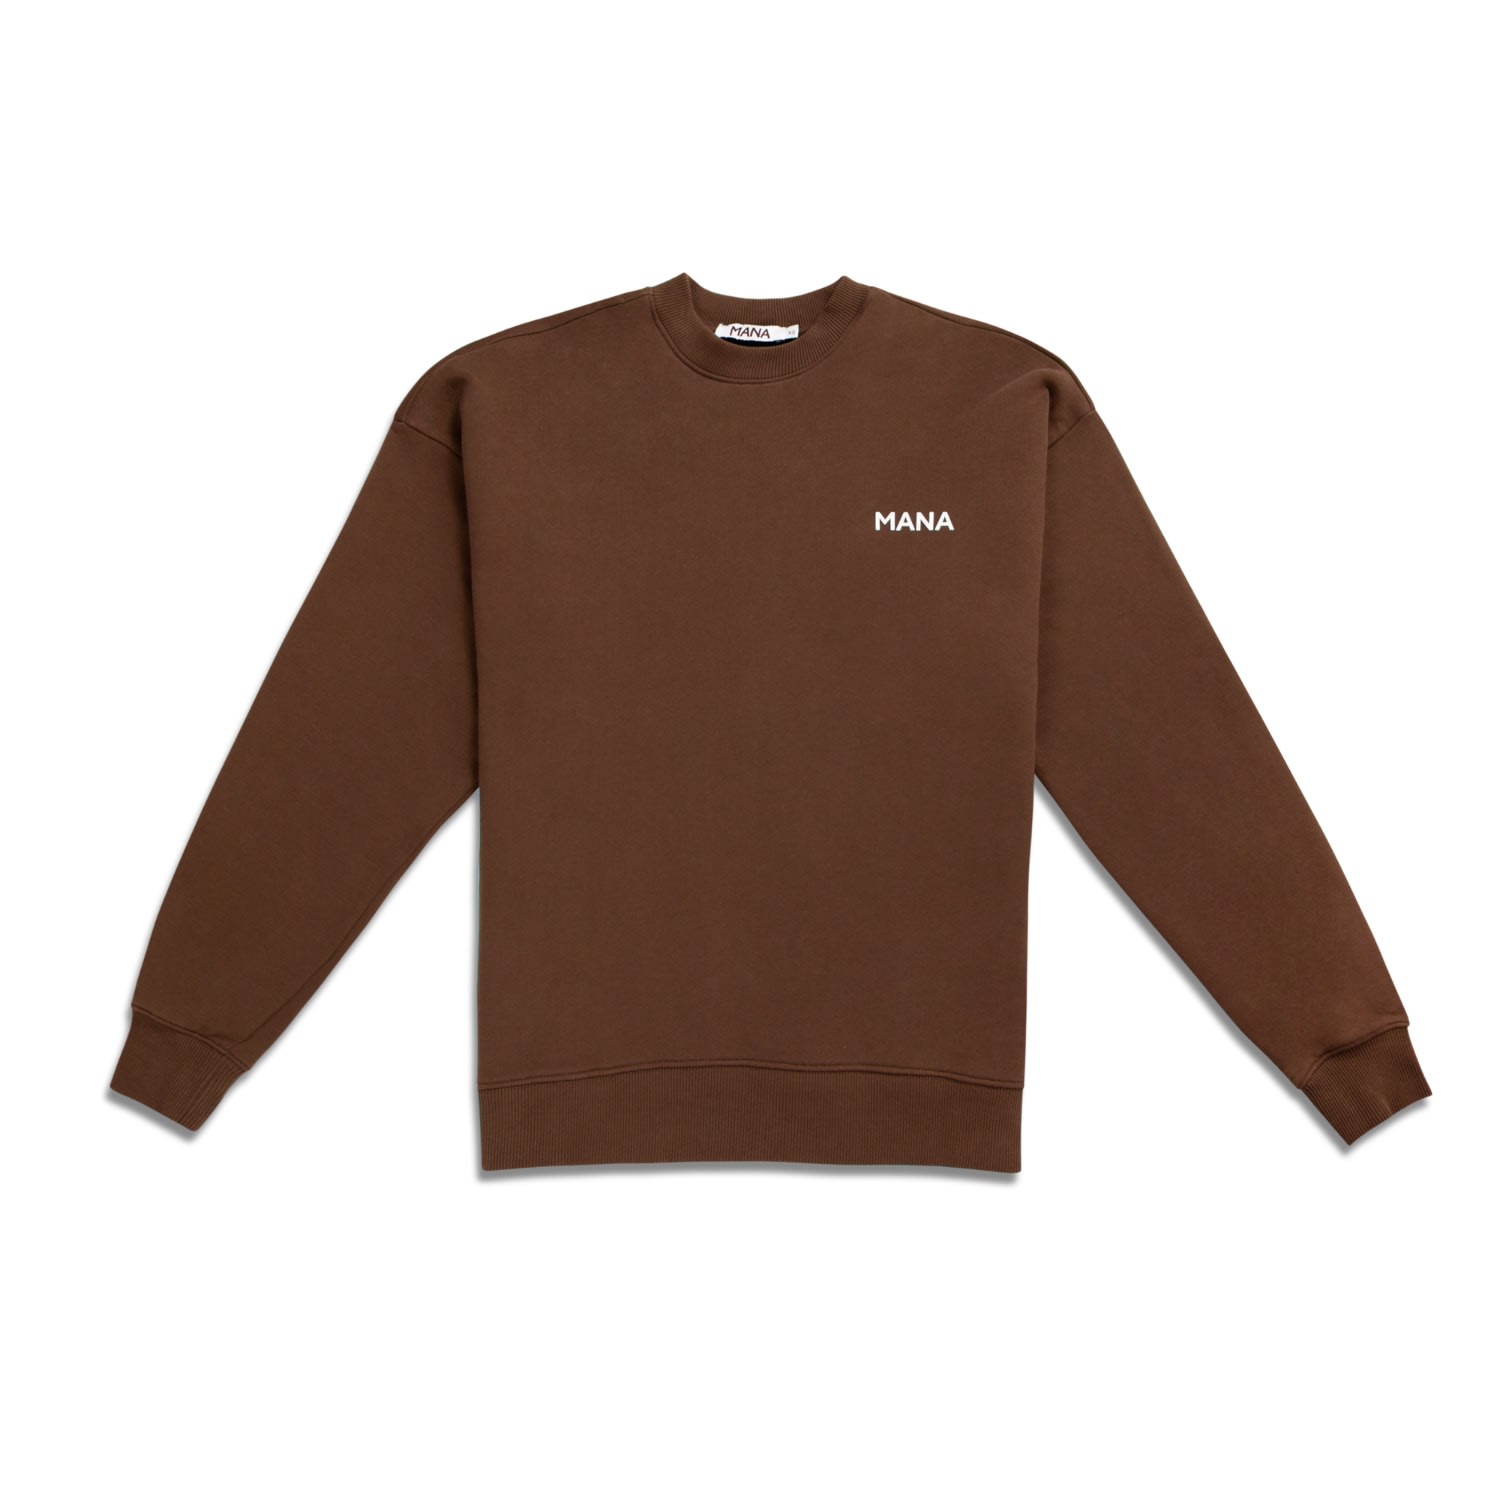 Deluxe Sweatshirt Mens In Chocolate Cosmos Brown Extra Small MANA The Movement